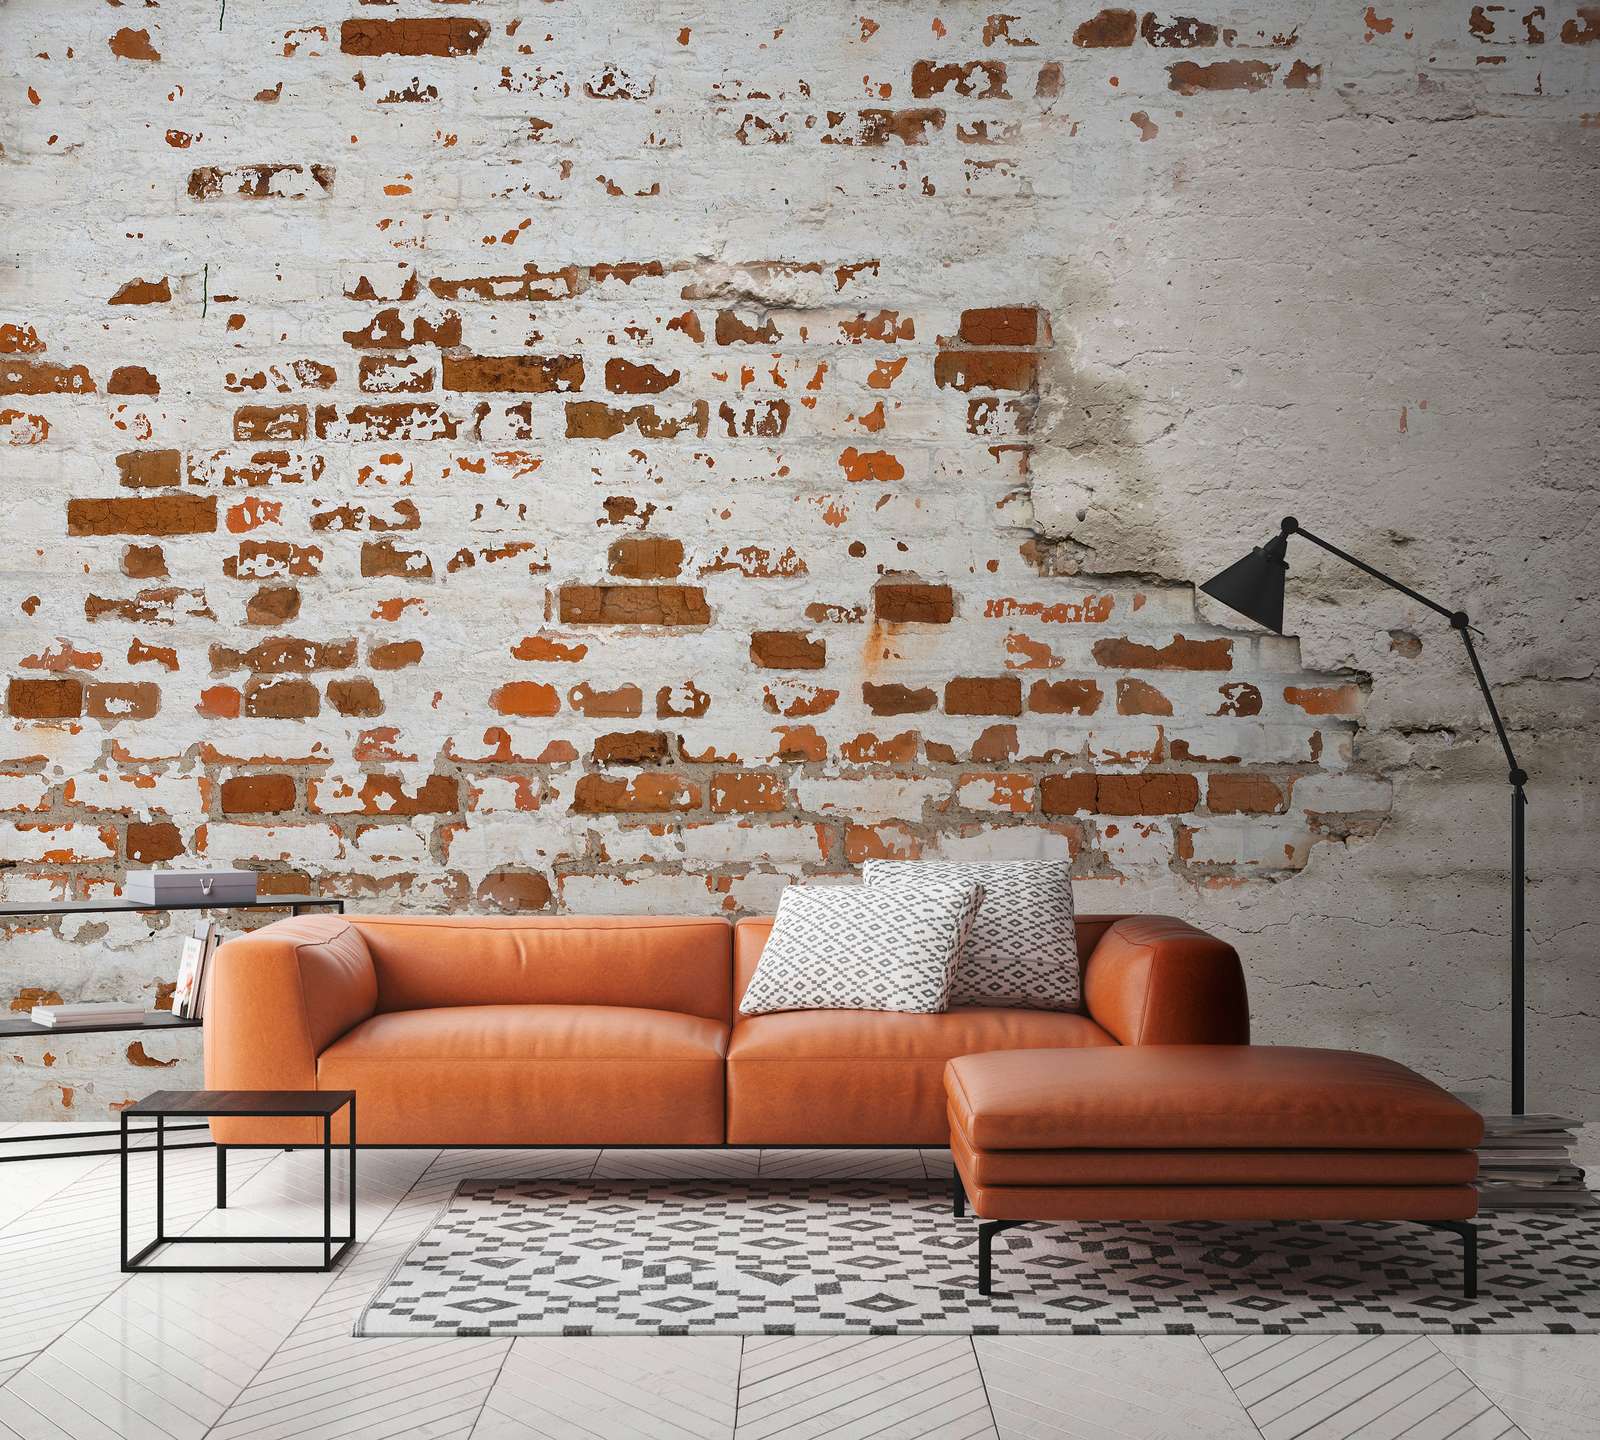             Photo wallpaper Brick Wall Plastered in 3D Industrial Style - Brown, Grey
        